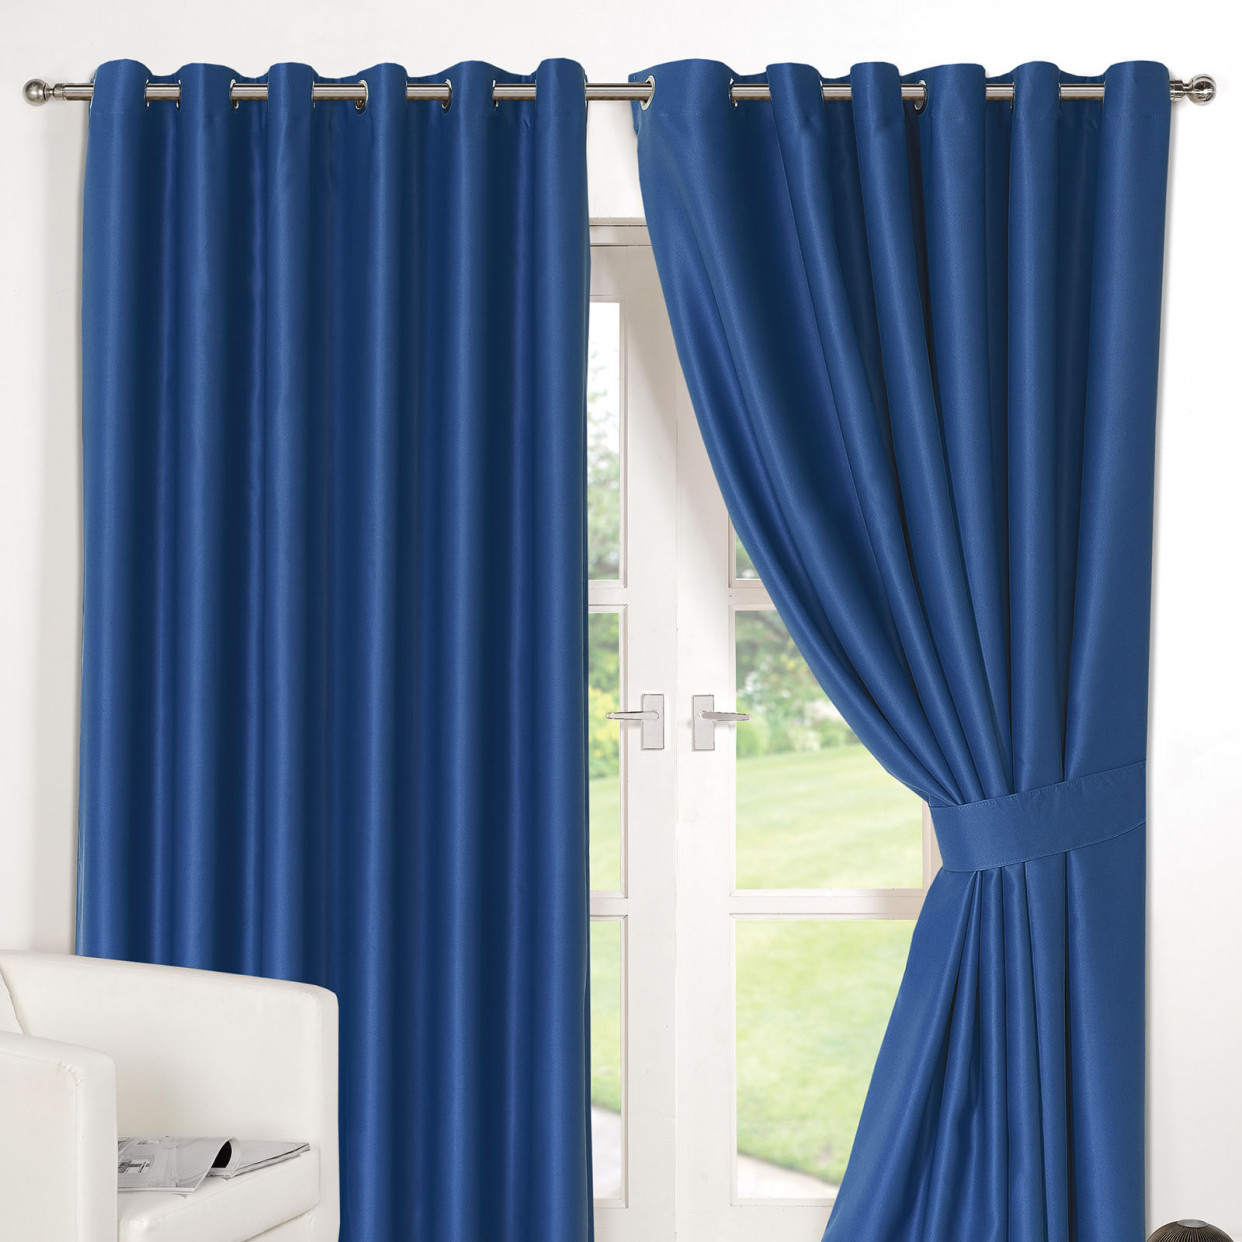 Dreamscene Ring Top Lined Thermal Blackout Eyelet Curtains, Blue - 90" x 90">